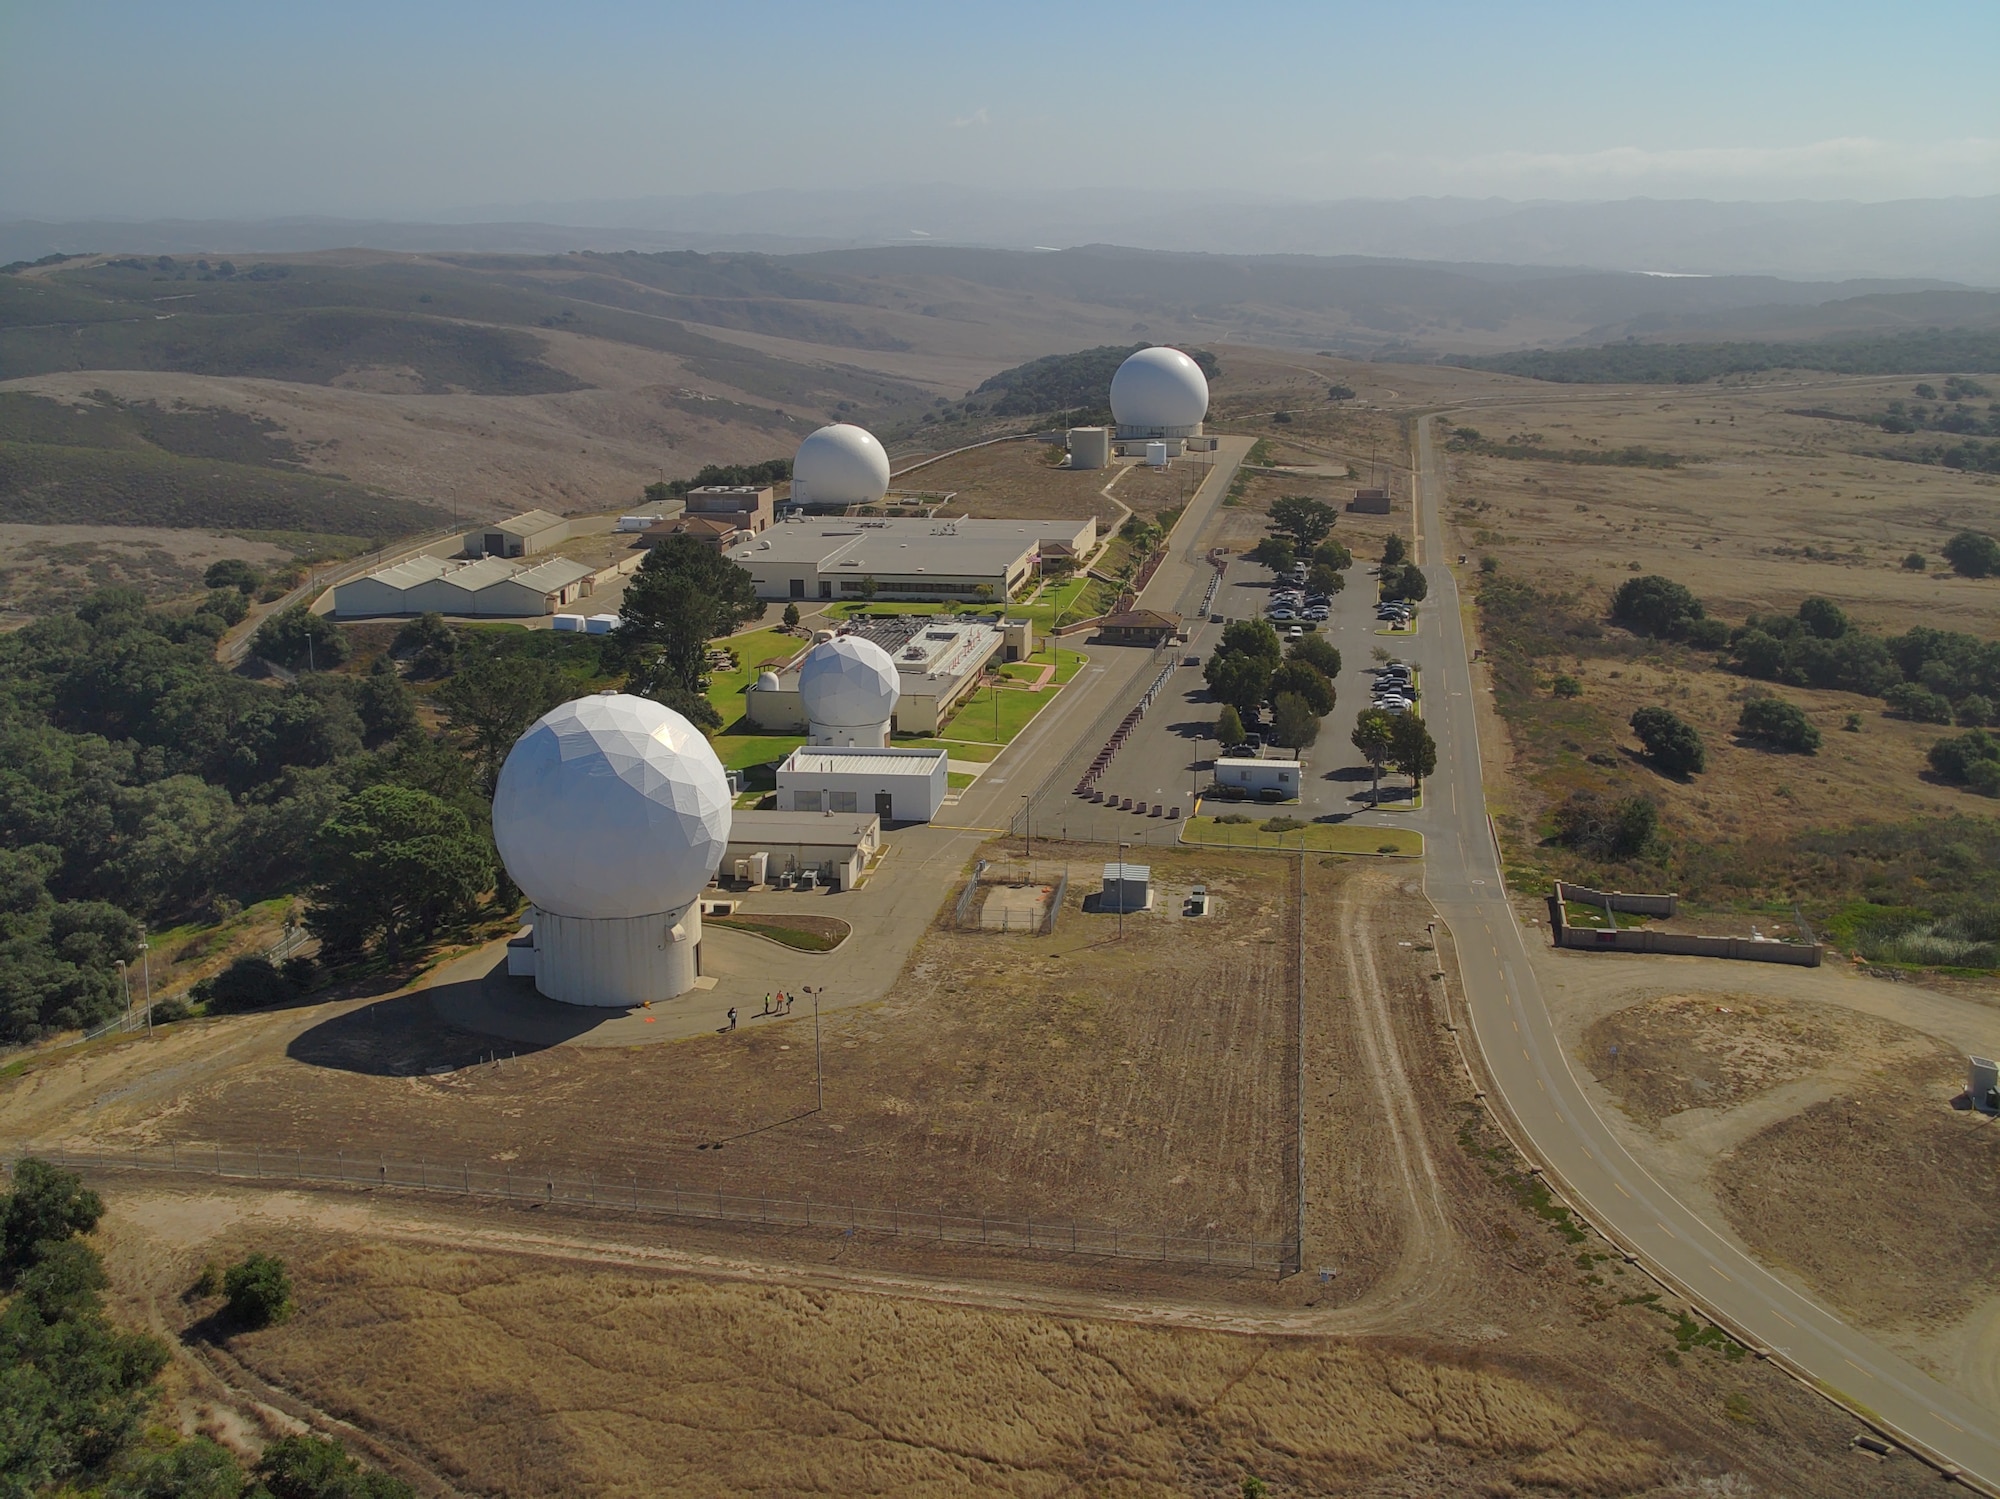 photo of radomes in Vandenburg from aerial angle